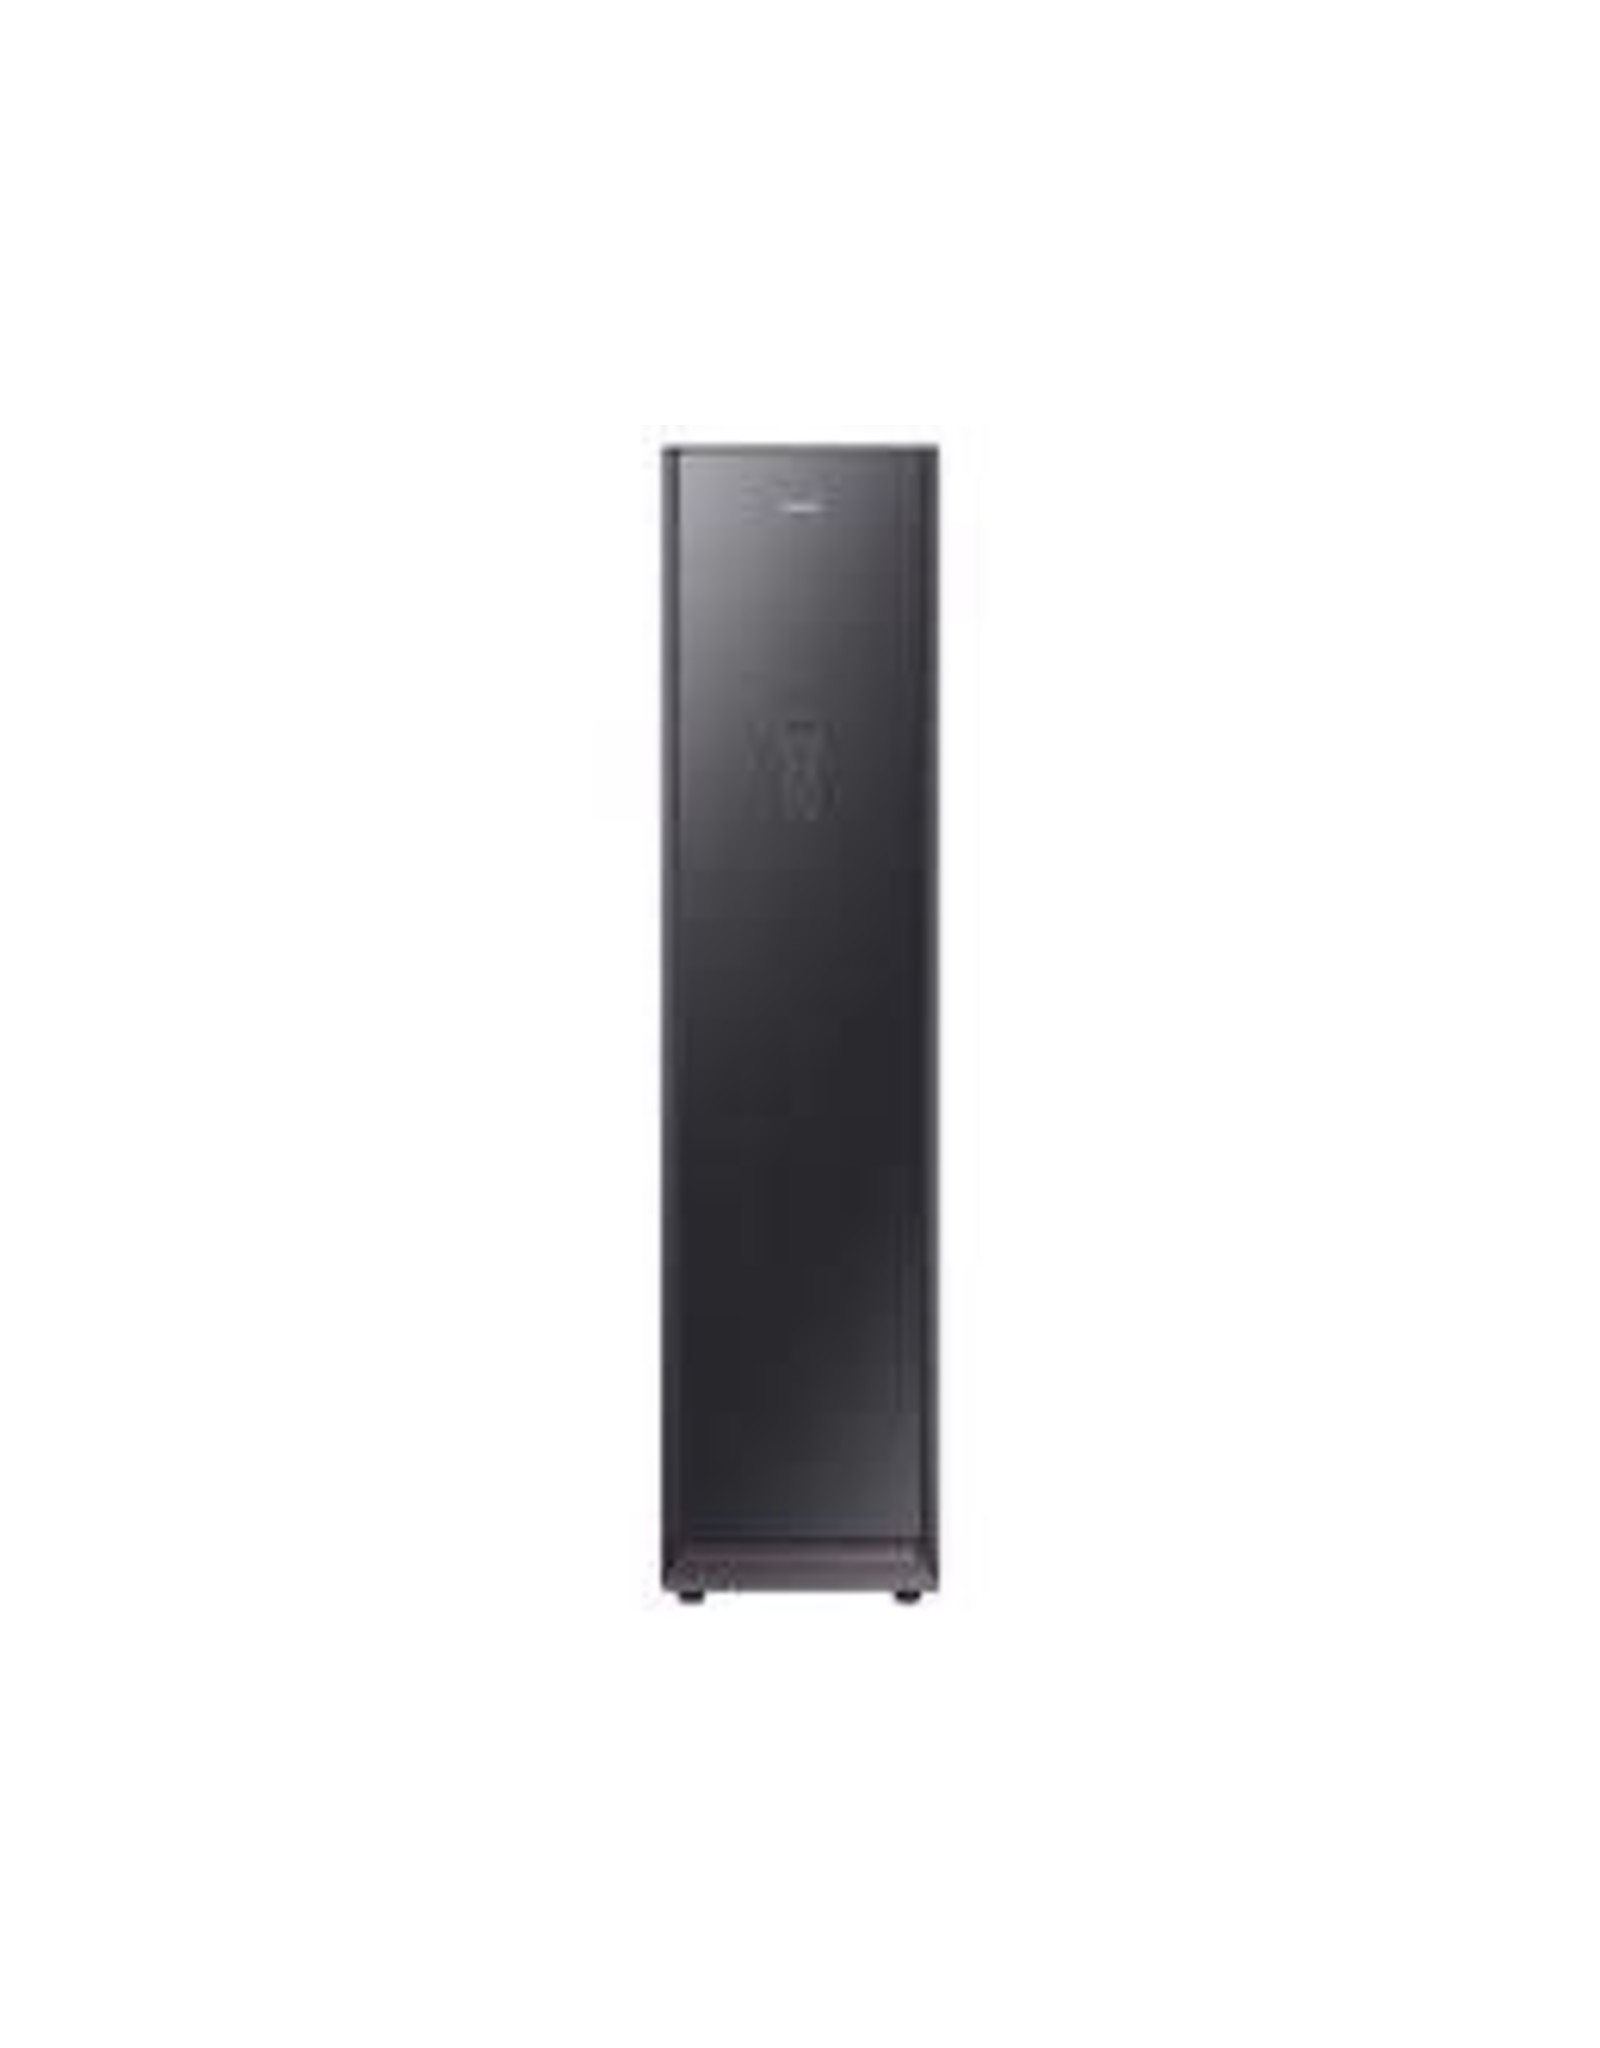 SAMSUNG DF60R8200DG  AirDresser with Steam and Sanitize Cycle, Wi-Fi Enabled, Deodorizing Filter in Dark Black